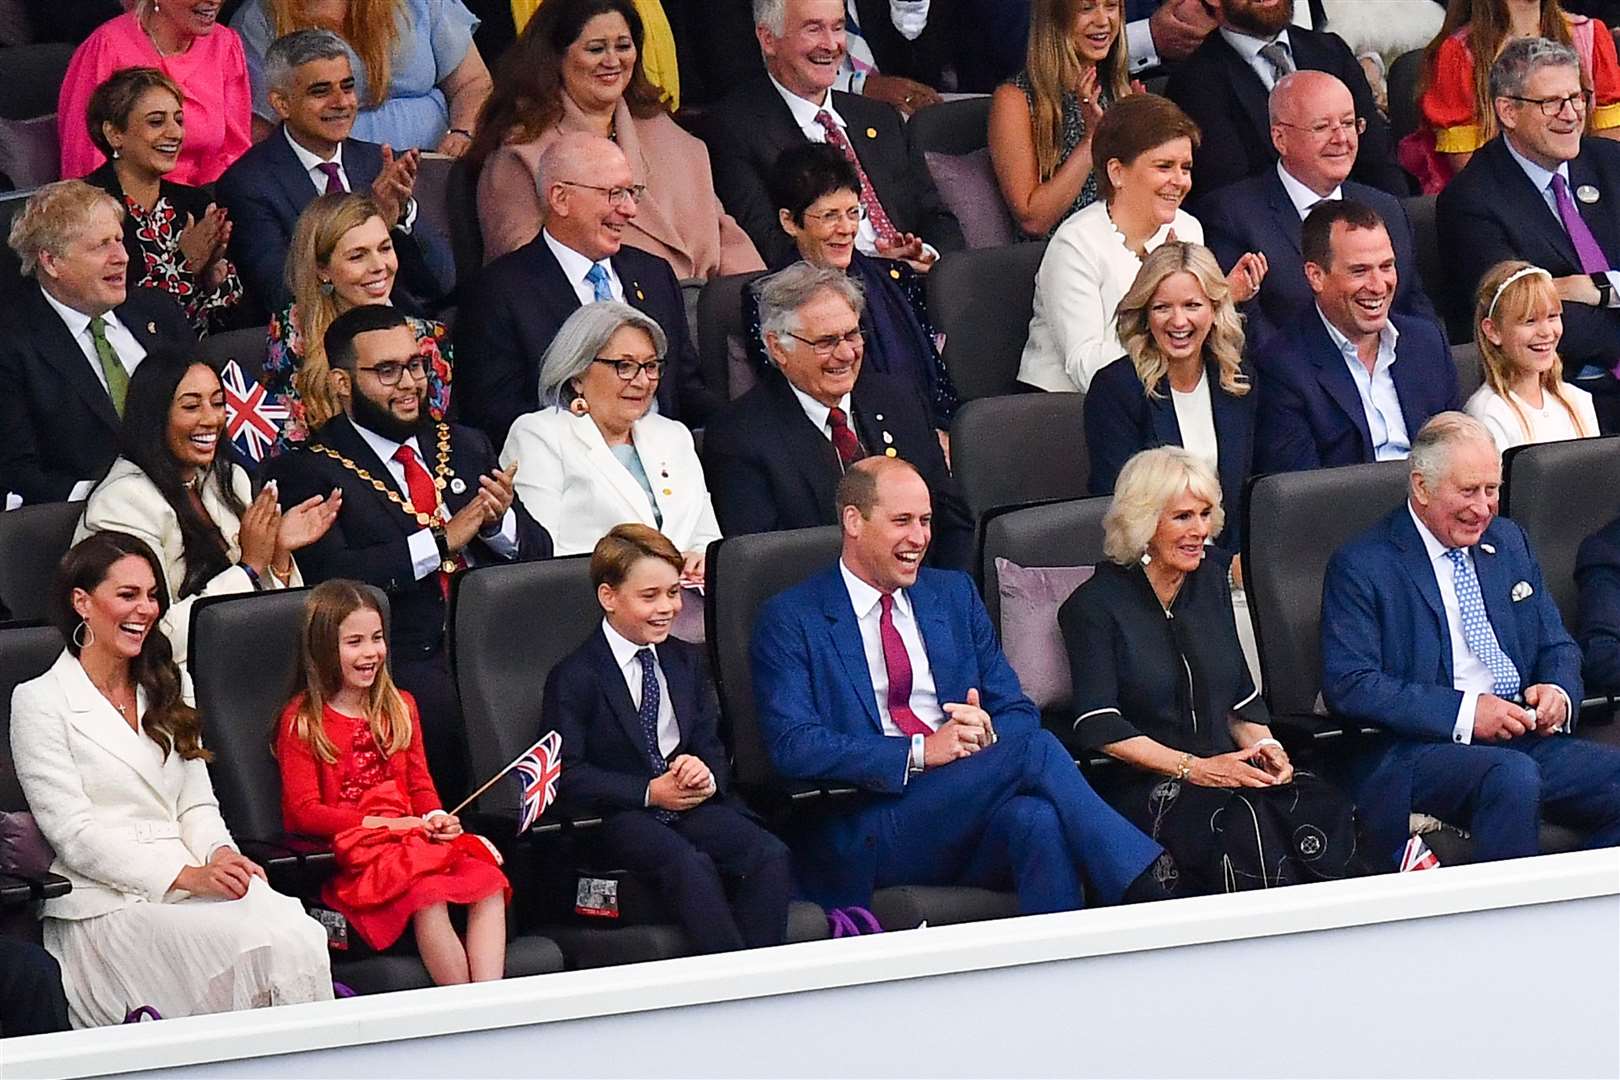 The Duchess of Cambridge, Princess Charlotte, Prince George, the Duke of Cambridge, the Duchess of Cornwall, the Prince of Wales in the royal box (Niklas Halle’n/PA)